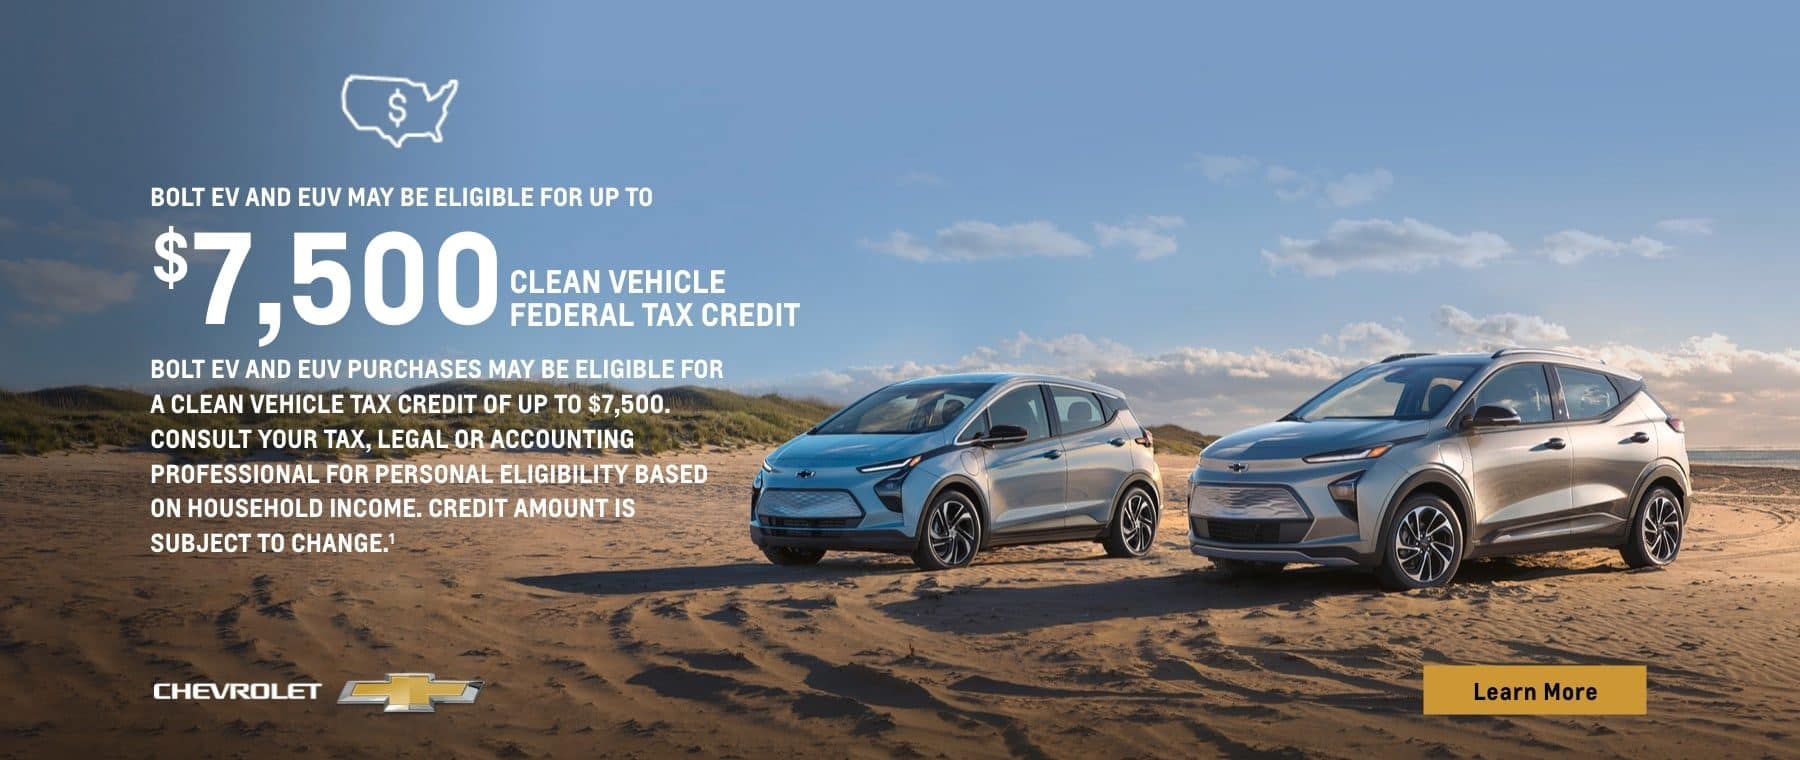 Bolt EV and EUV may be eligible for up to $7,500 Clean Vehicle Federal Tax Credit. Bolt EV and EUV purchases may be eligible for a Clean Vehicle Tax Credit of up to $7,500. Consult your tax, legal or accounting professional for personal eligibility based on household income. Credit amount is subject to change.